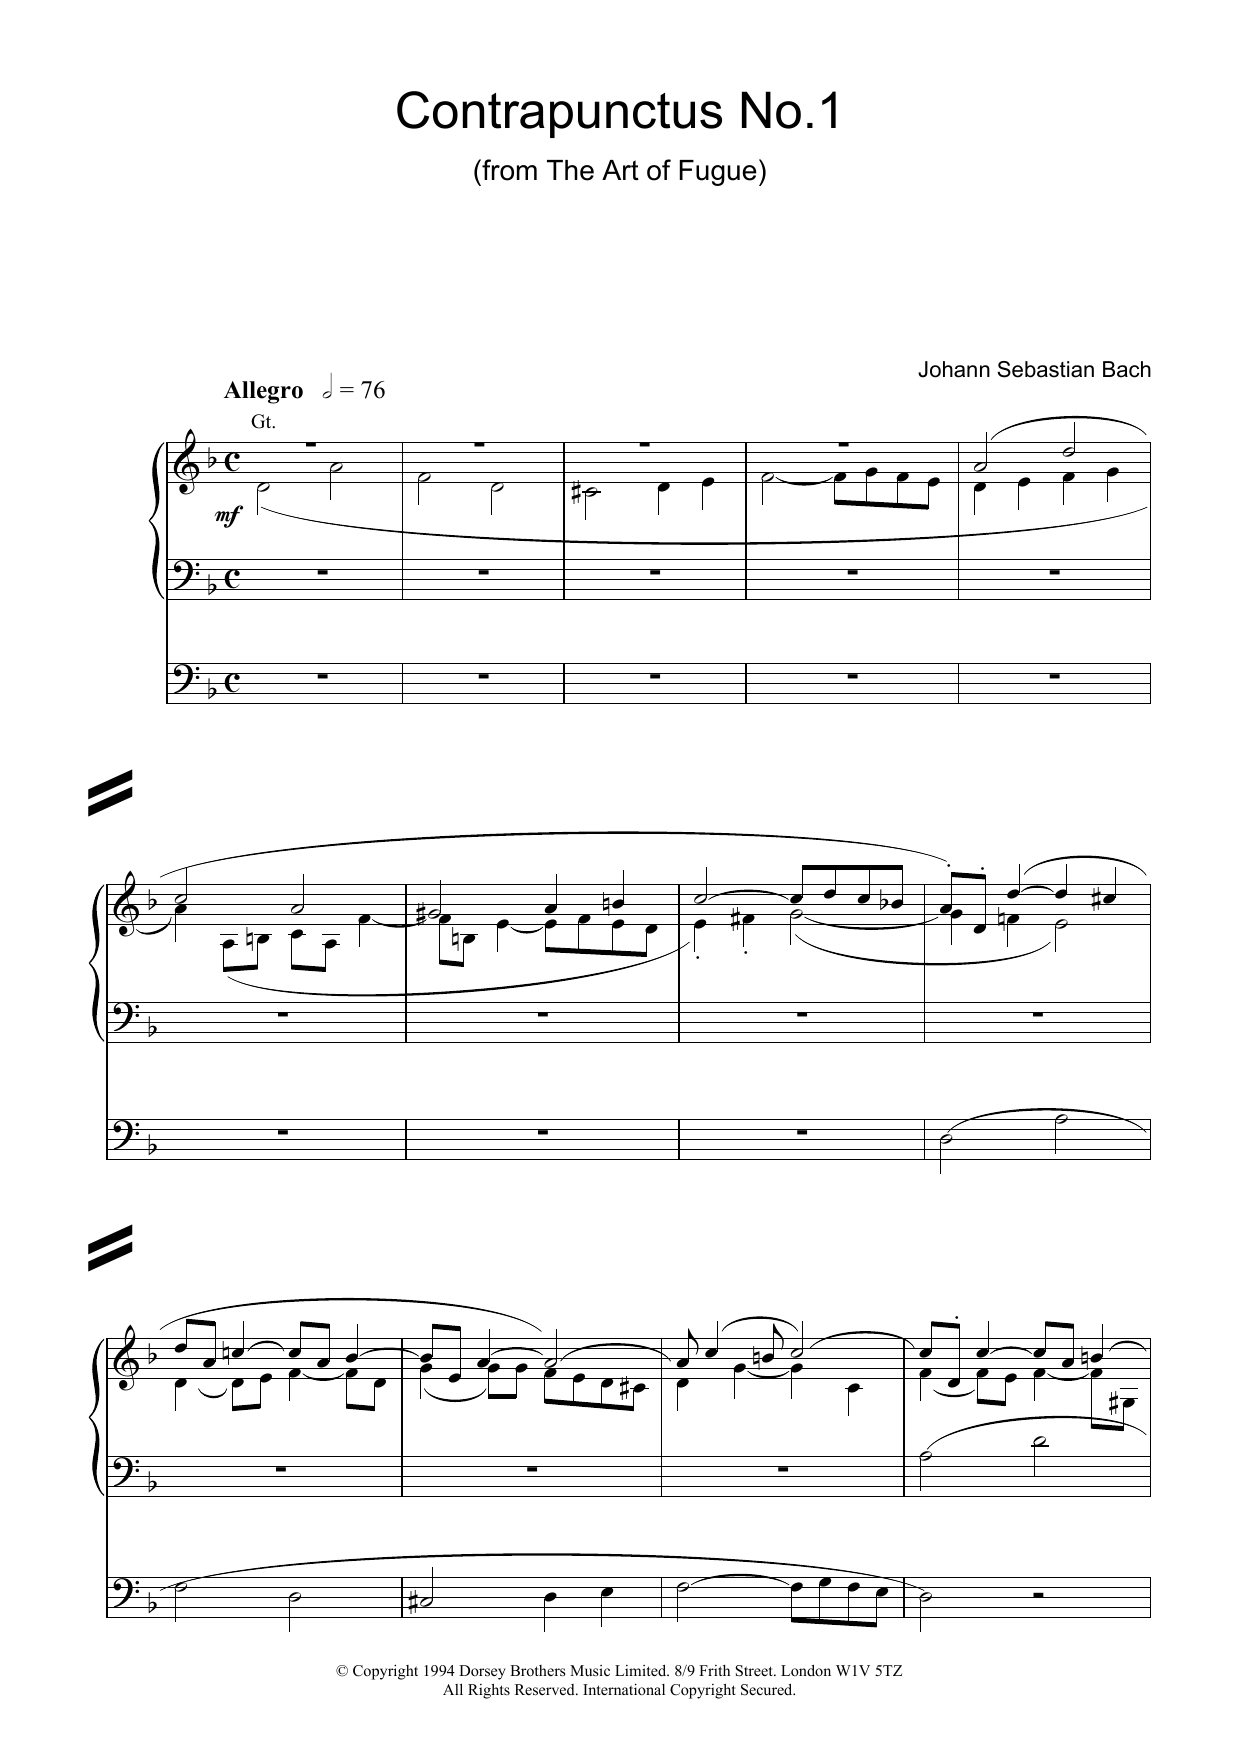 Johann Sebastian Bach Contrapunctus No.1 from The Art of Fugue sheet music notes and chords. Download Printable PDF.